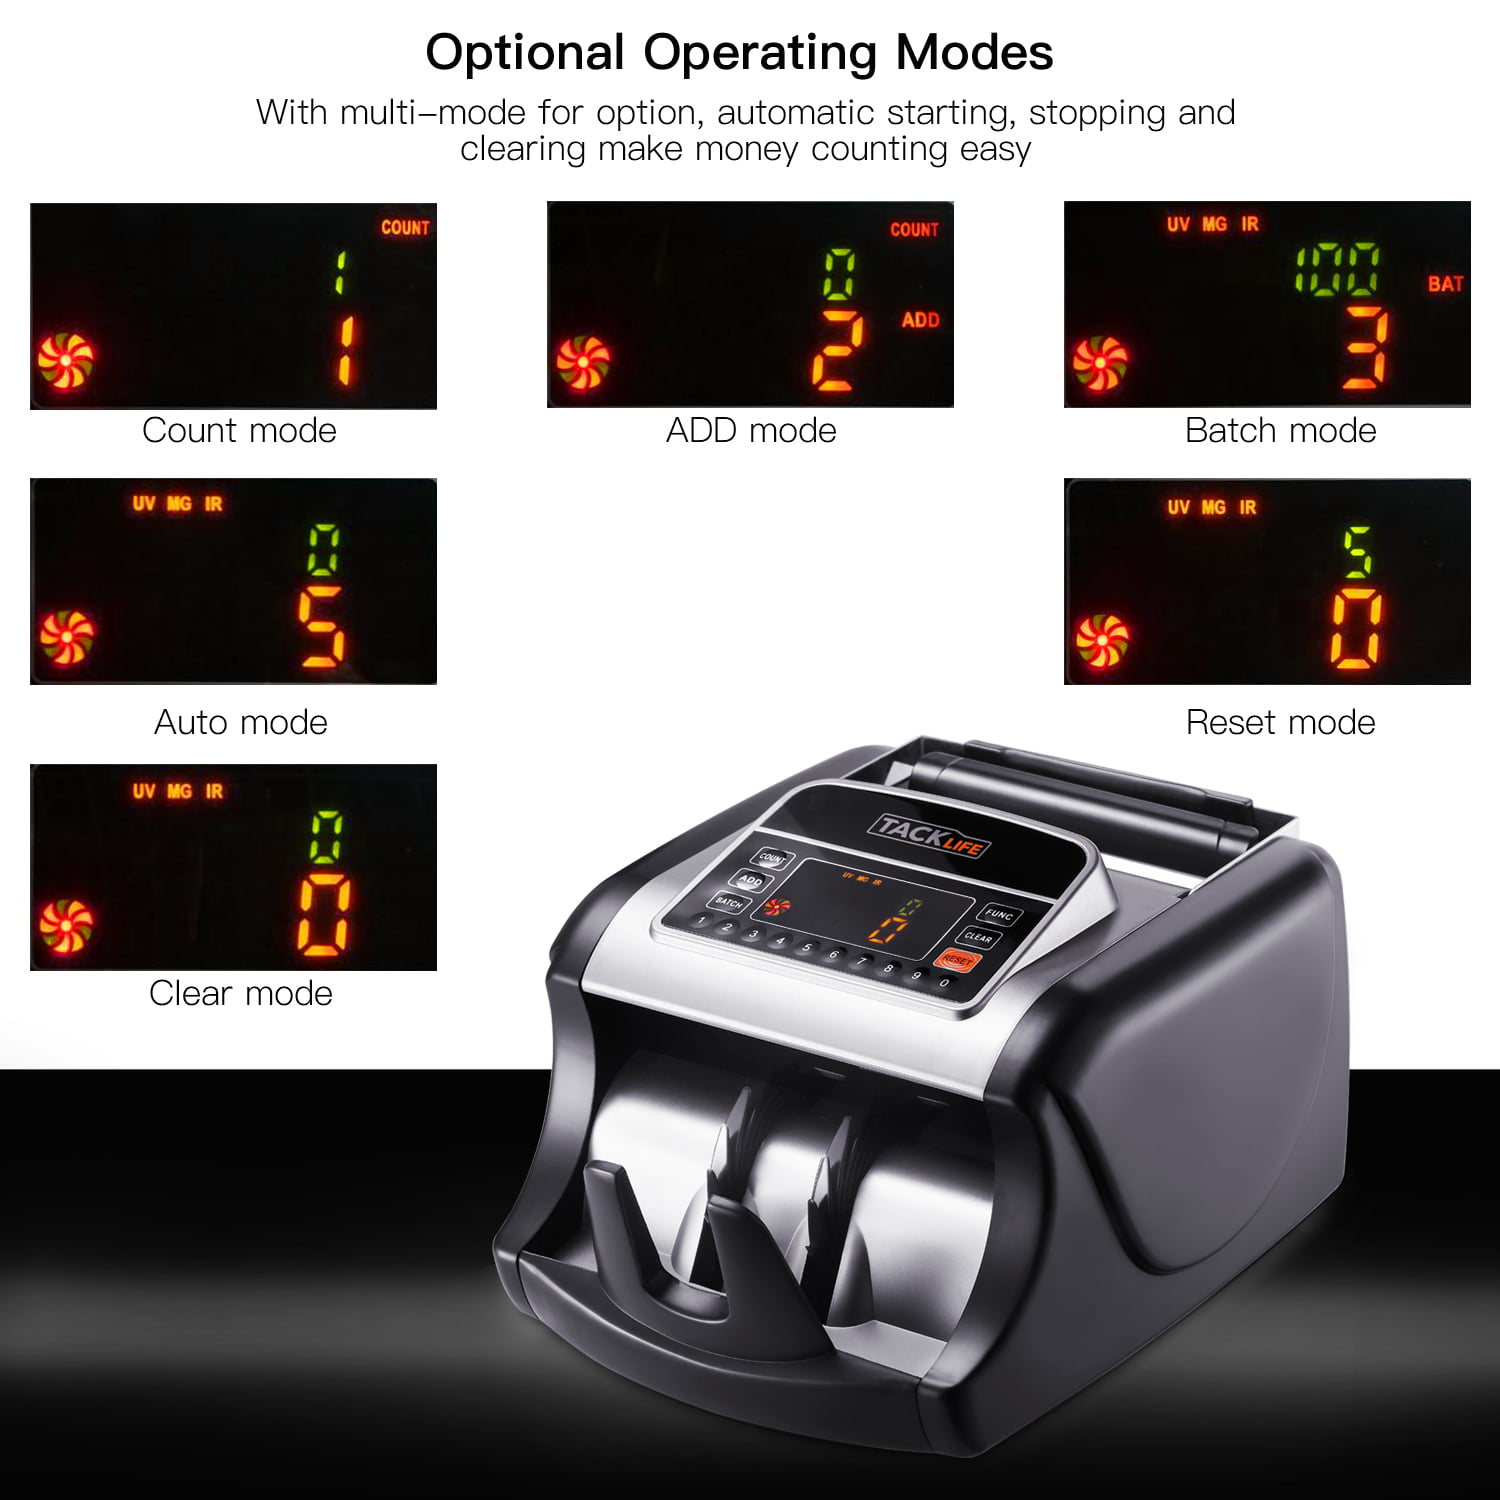 Value Counting MMC03 Black Rechargeable Bill Counting Machine UV/MG/IR Detection Bill Counter USD Money Counter with Counterfeit Bill Detection External Display LED Display Batch Modes 